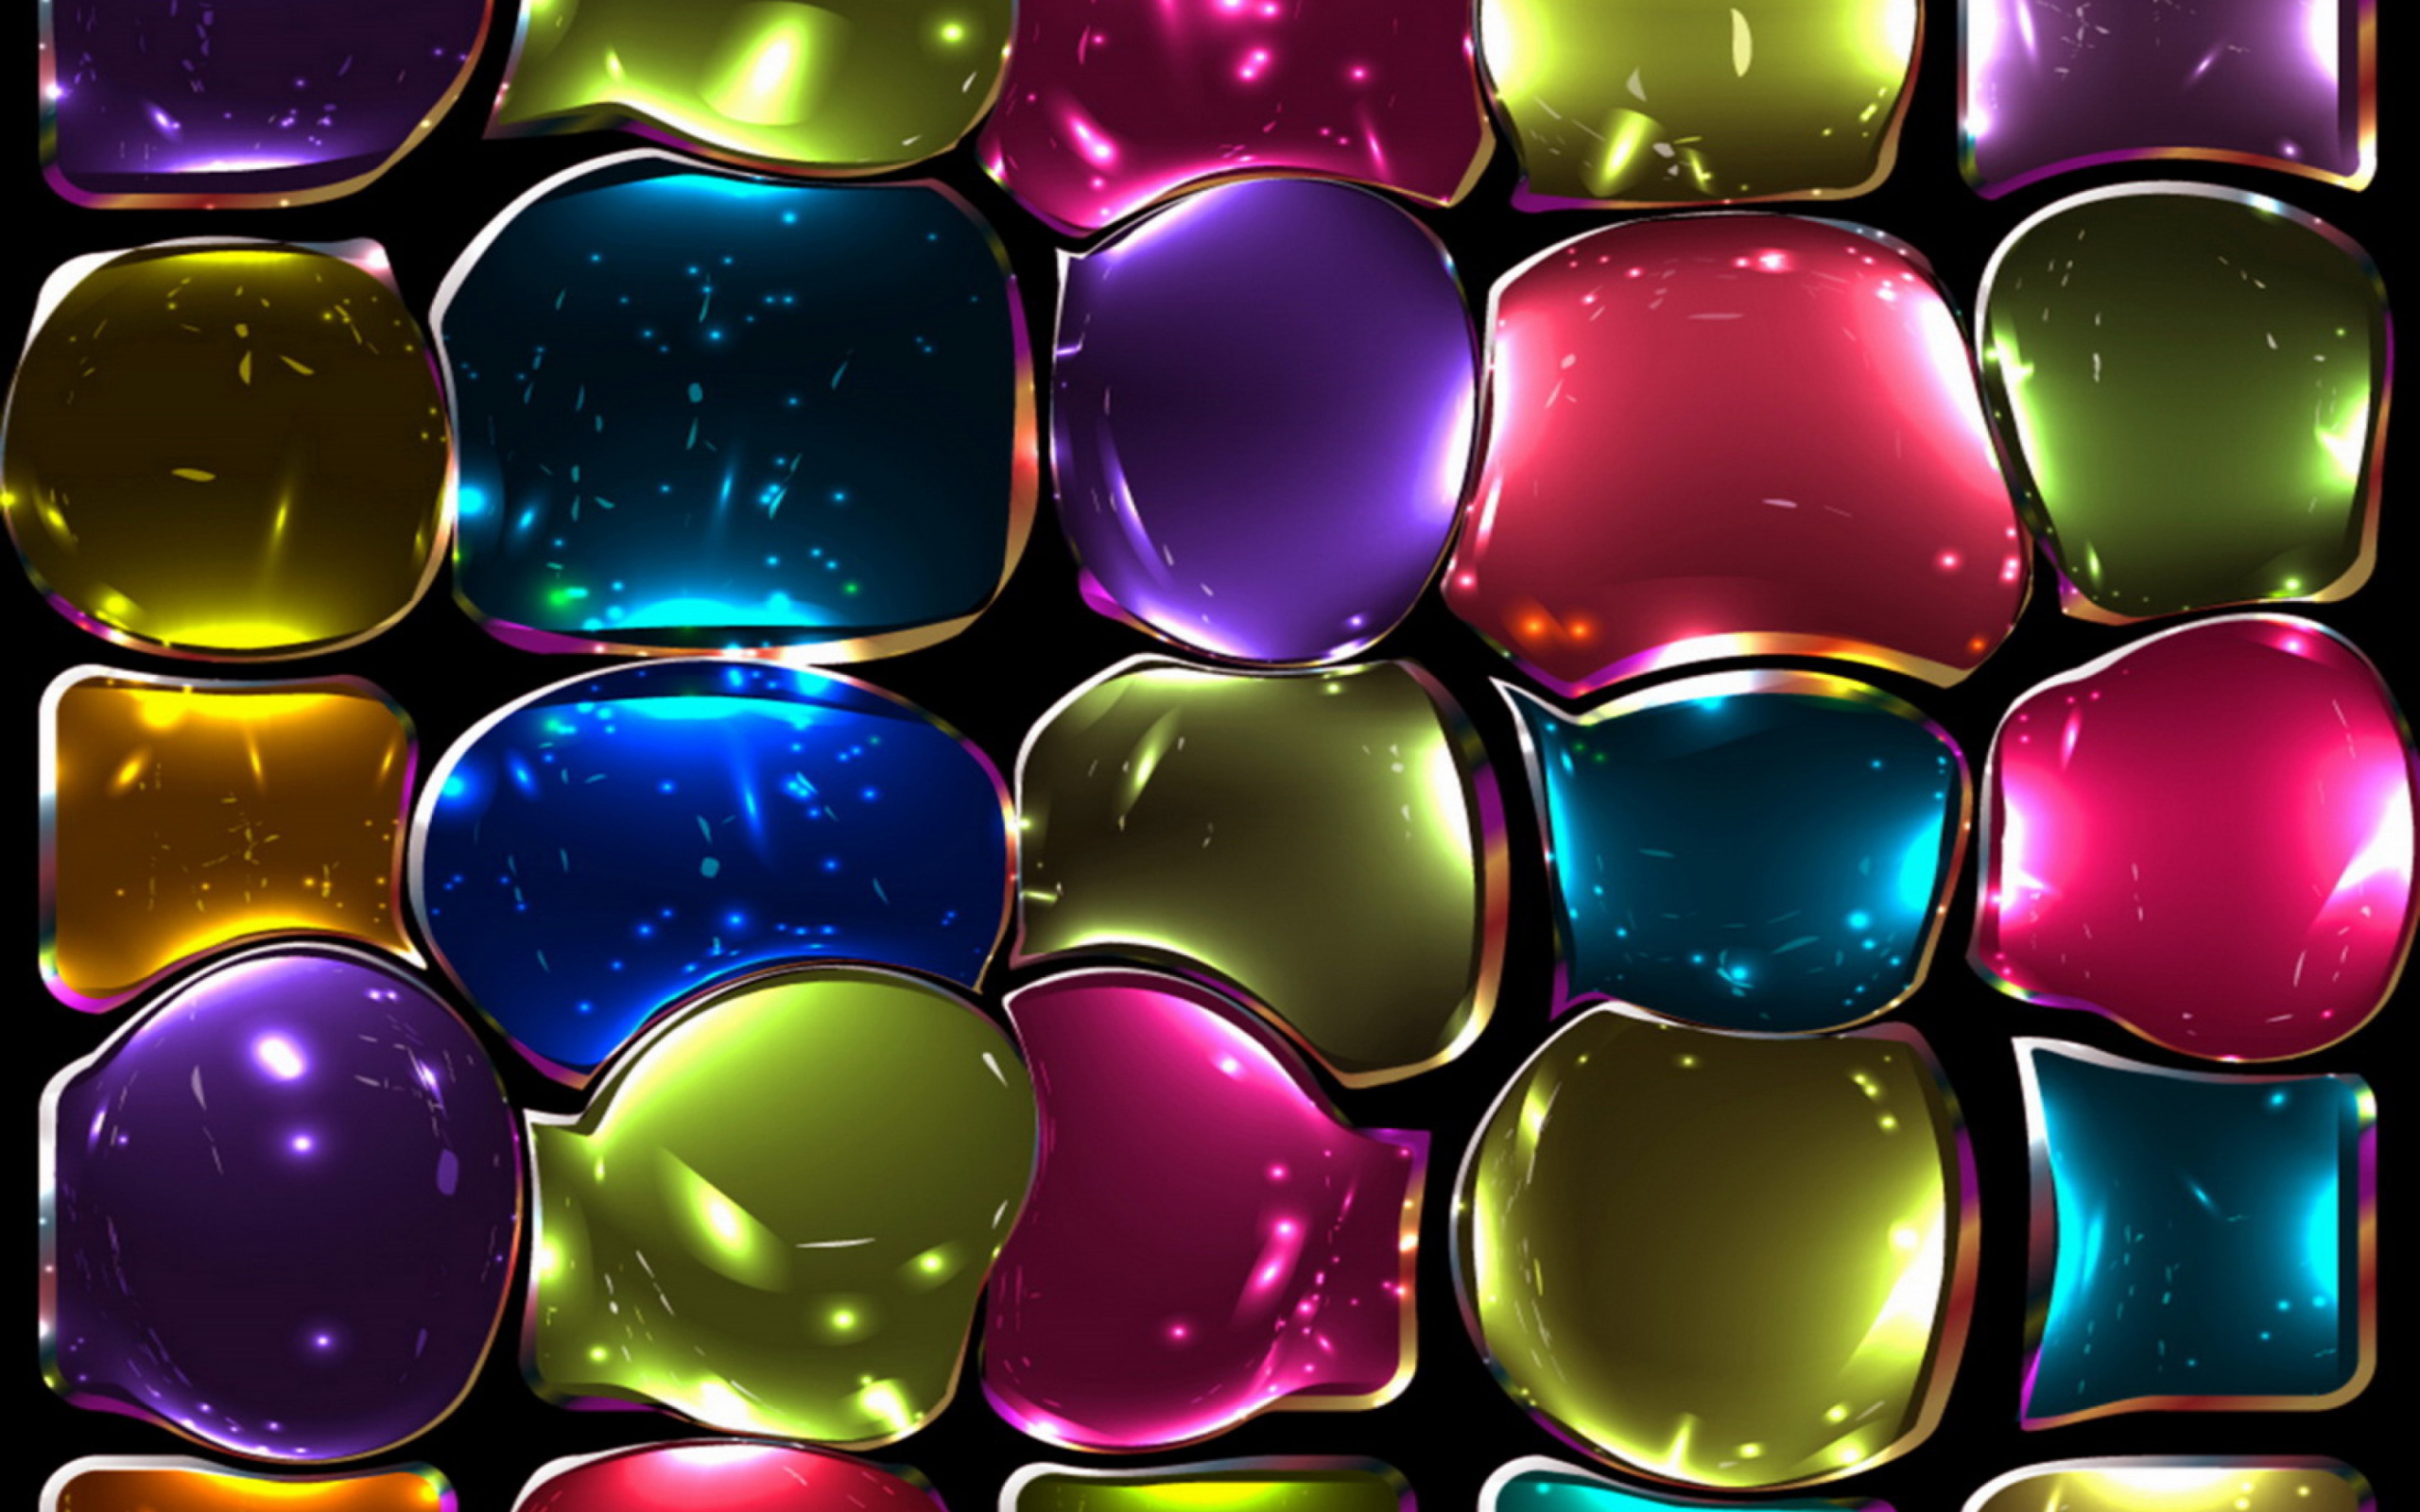 Stained Glass wallpaper 2560x1600